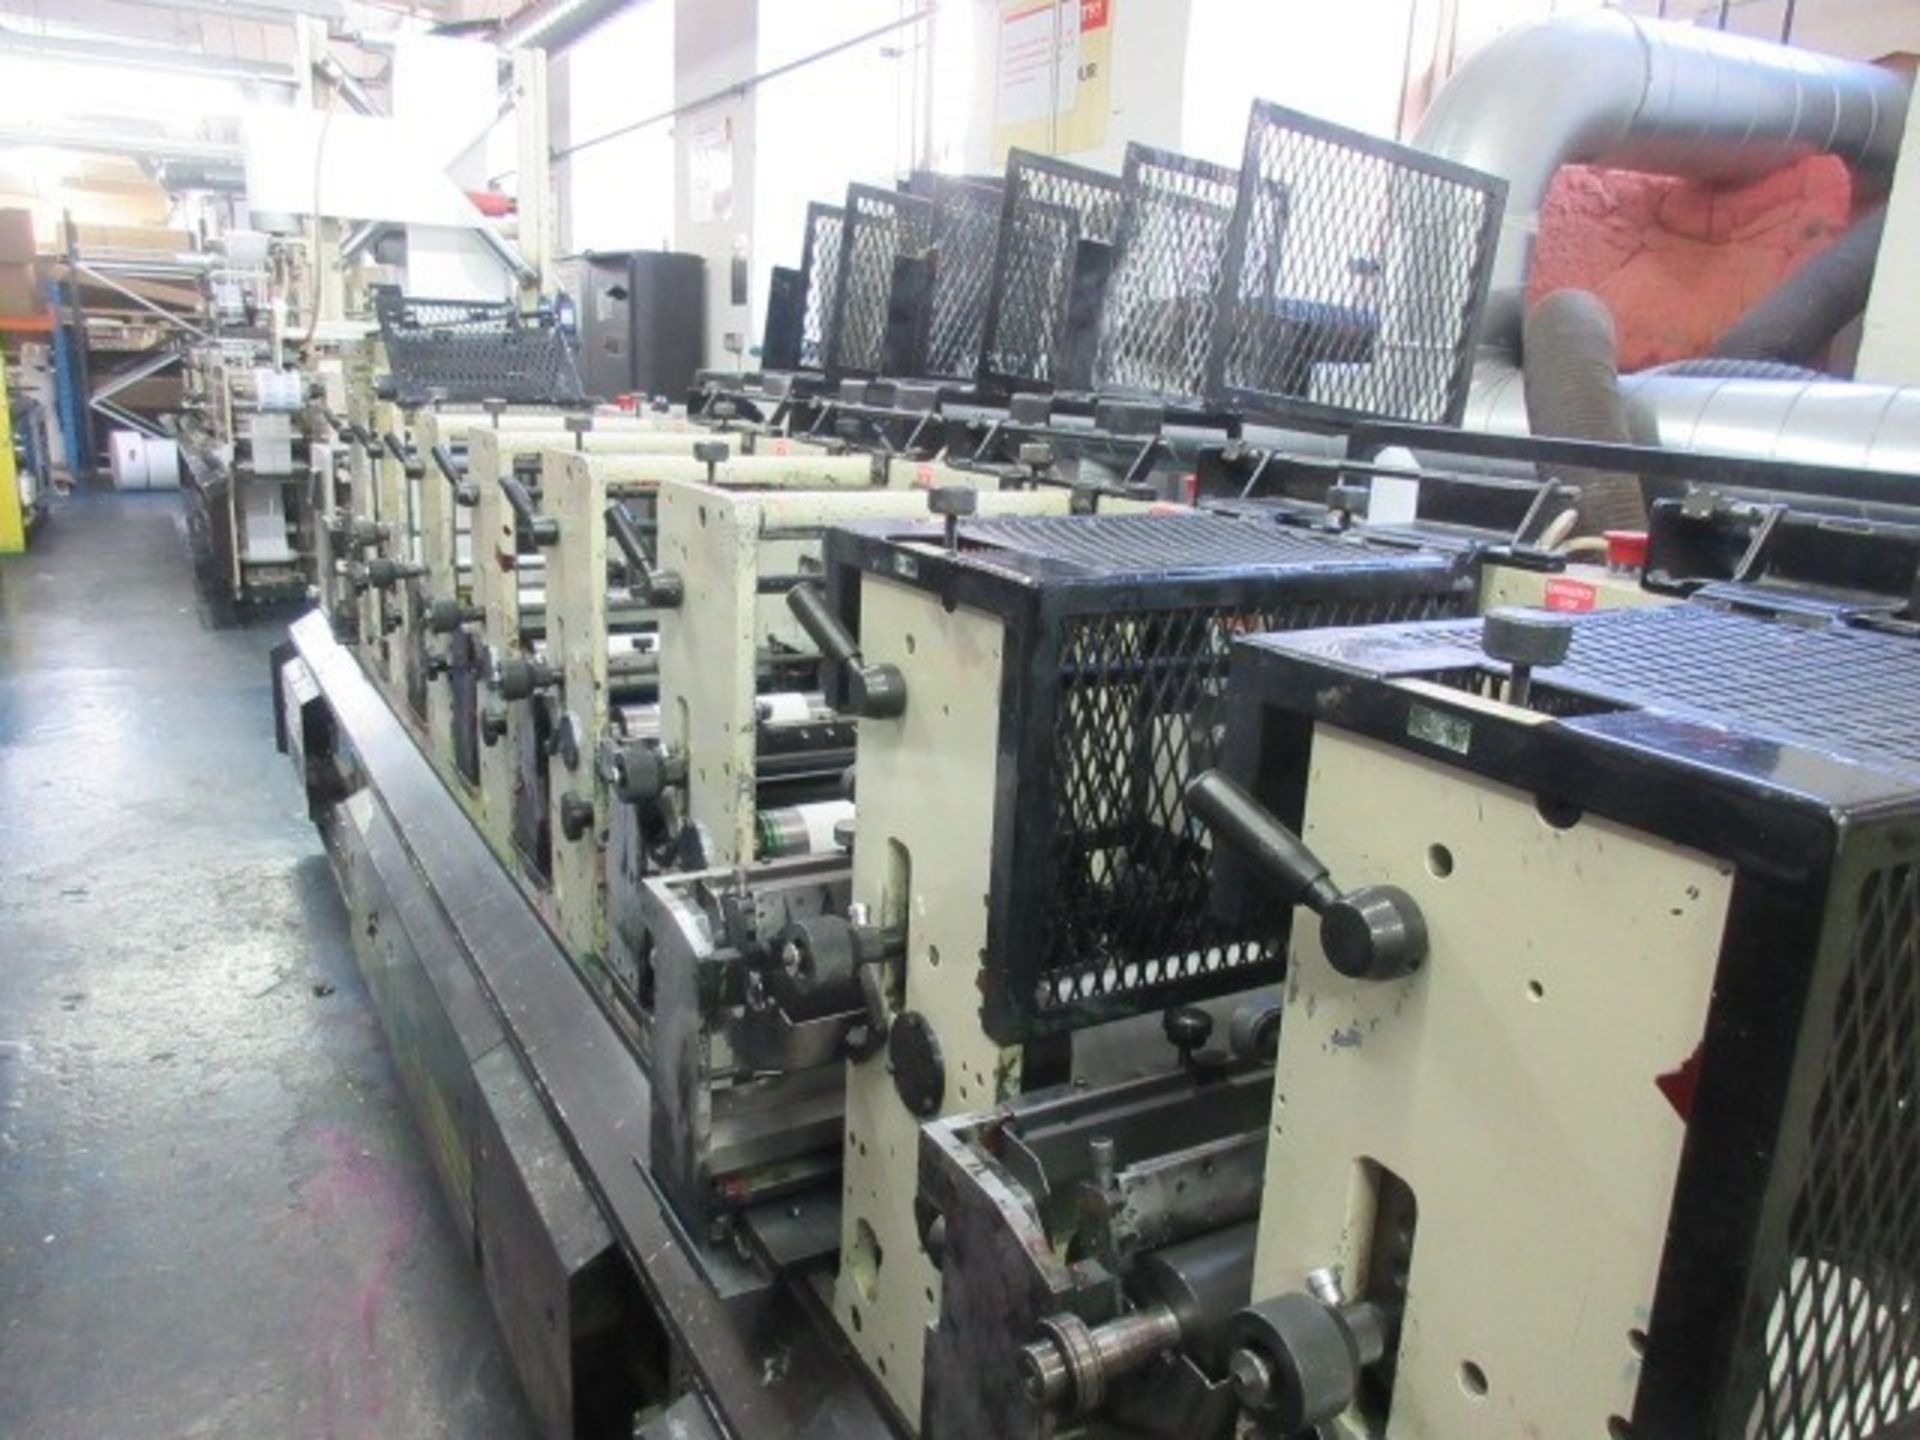 Mark Andy 2200-10F 10” 8 colour flexographic label printing press. Serial no: 1260086 (2002) - Image 183 of 383